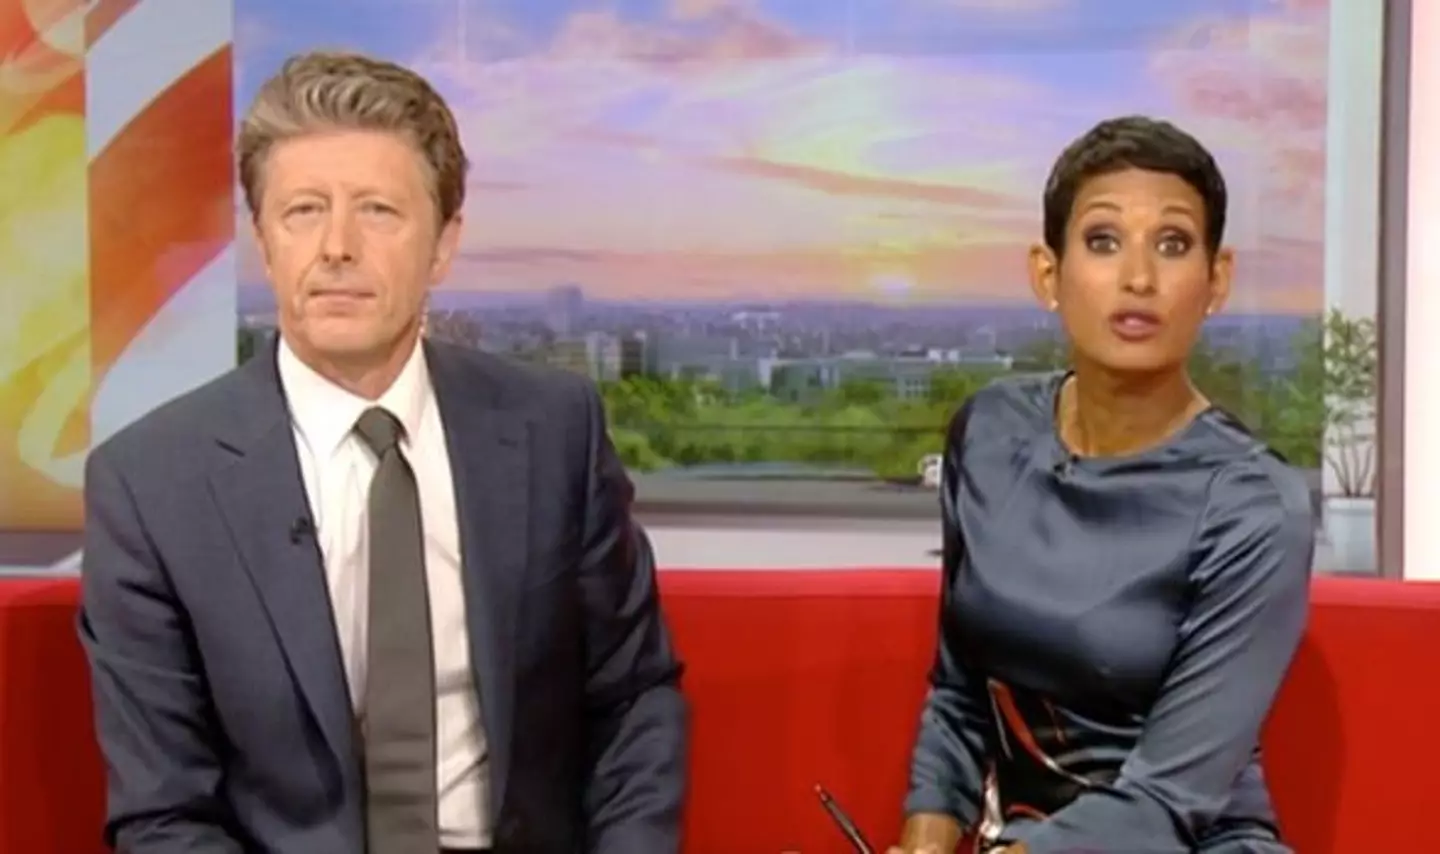 BBC Breakfast also featured complaints (